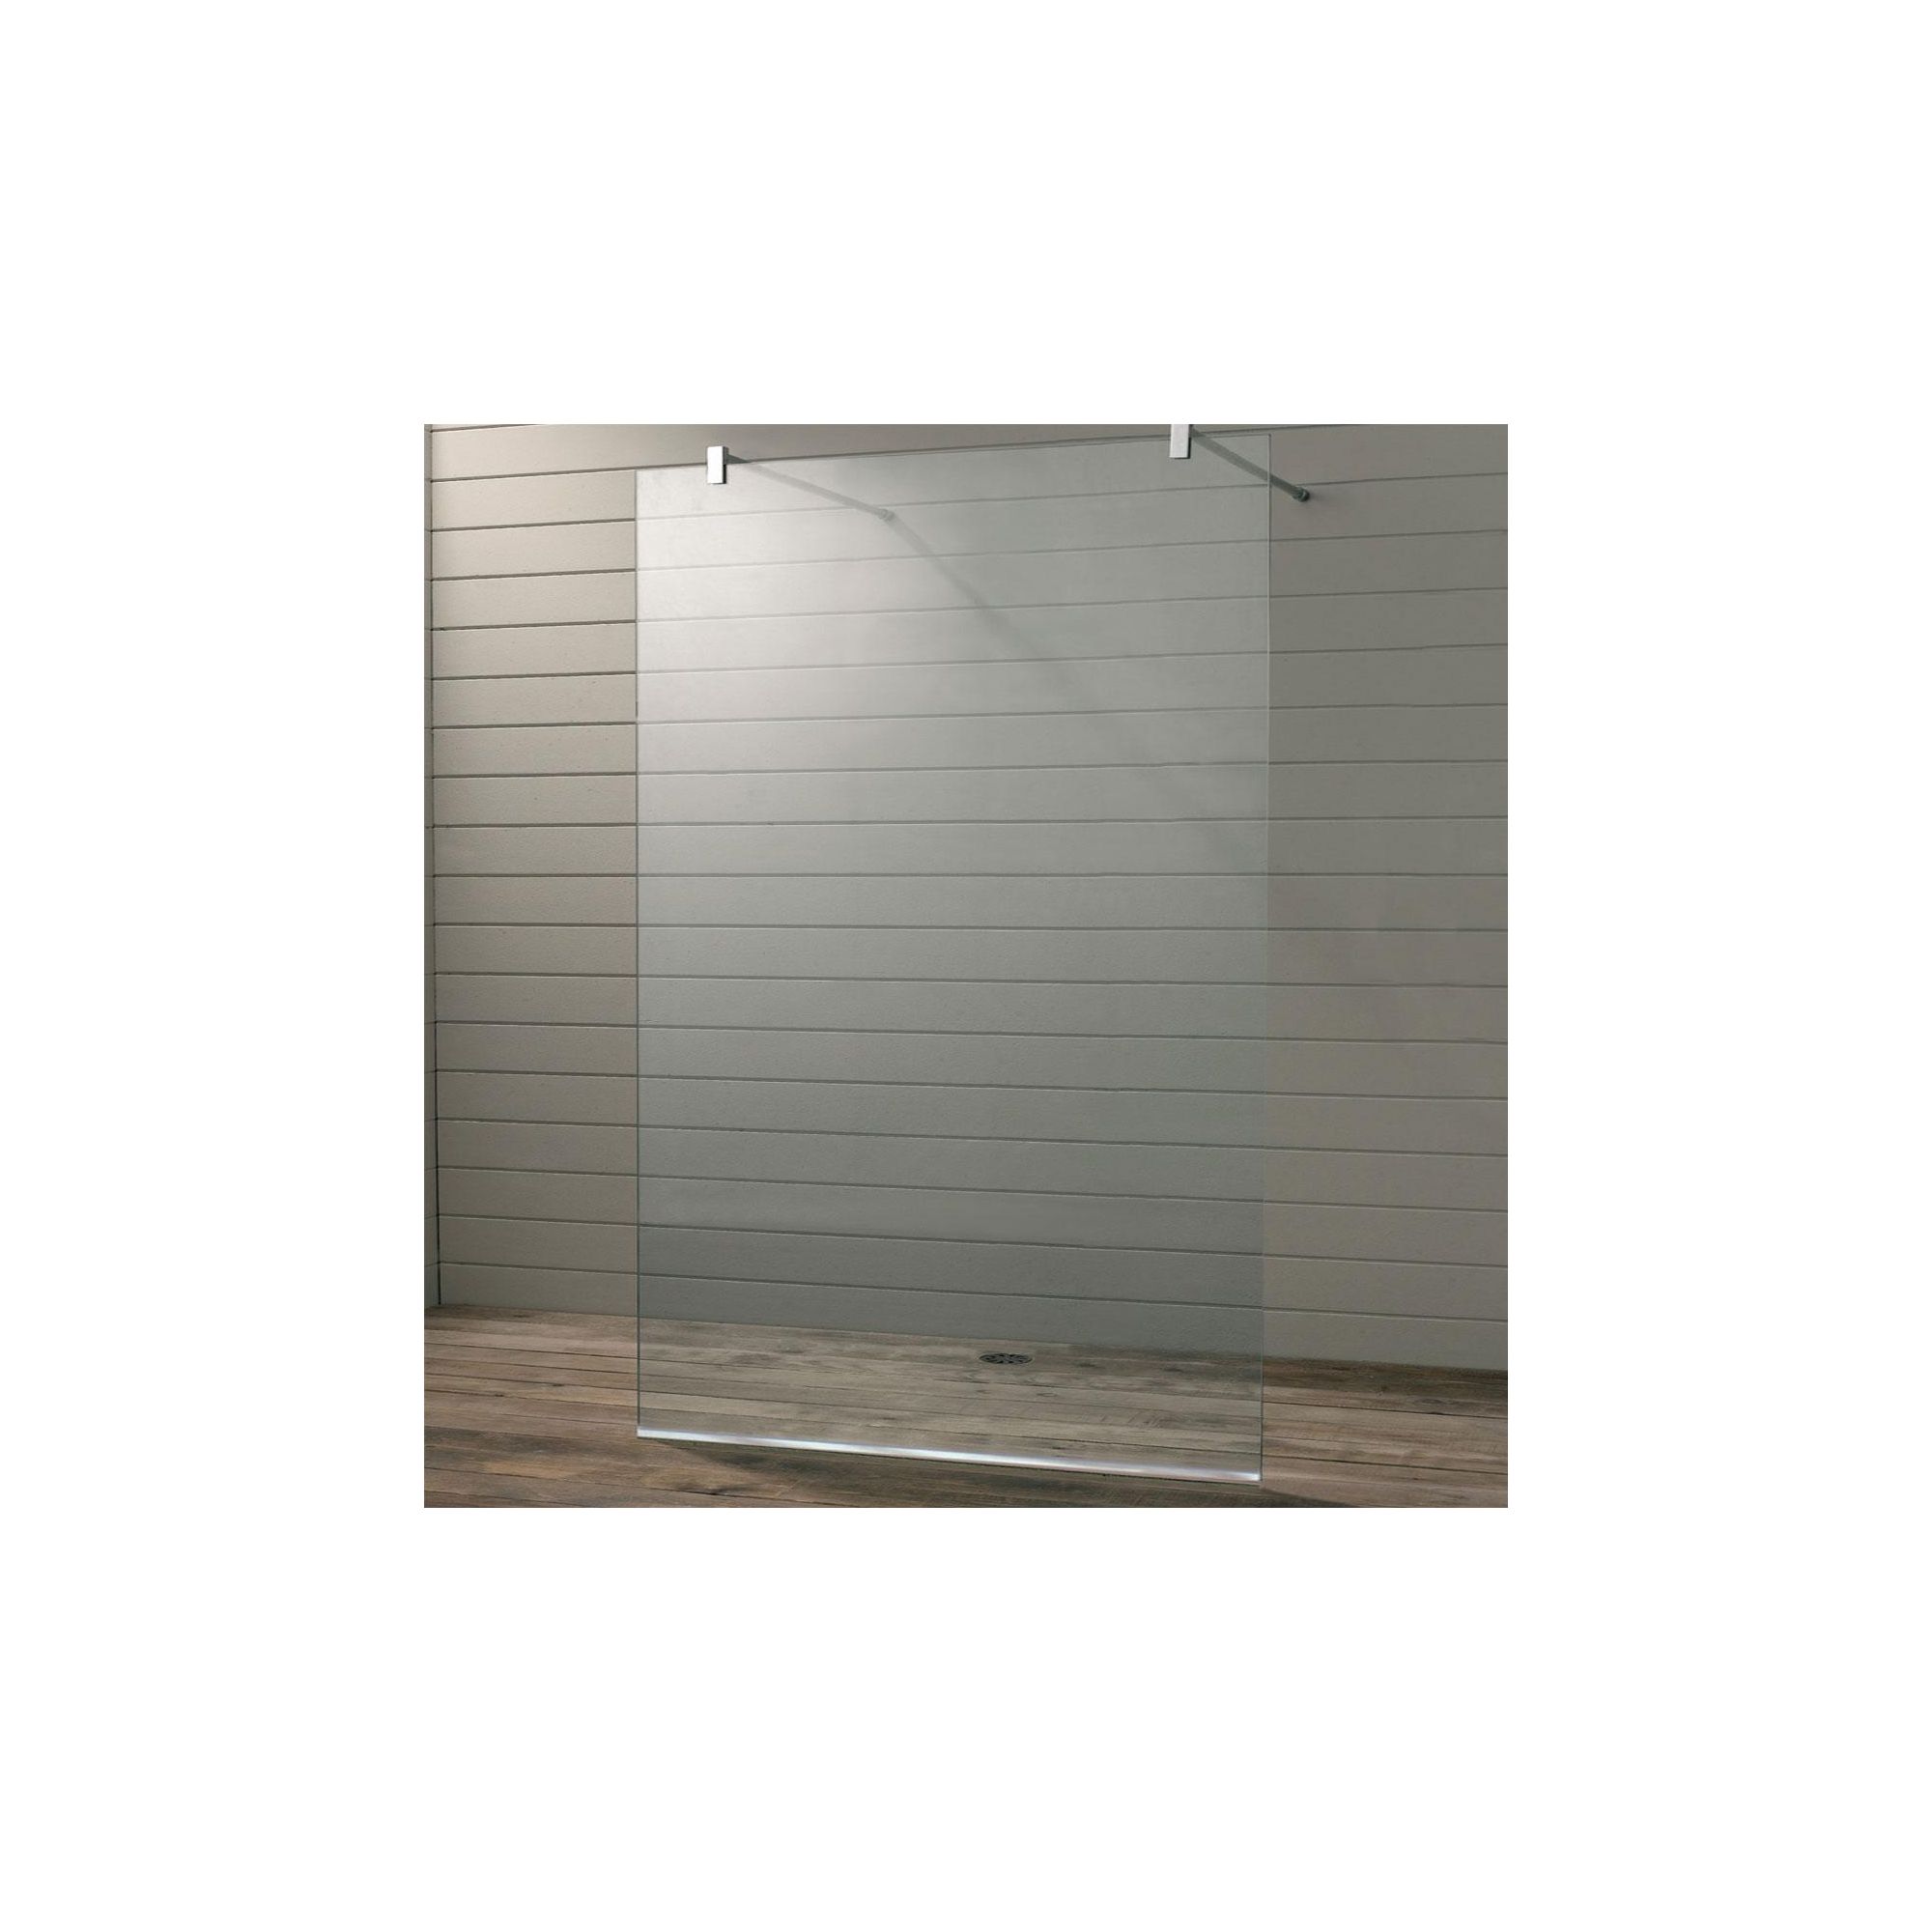 Duchy Premium Wet Room Glass Shower Panel, 1400mm x 700mm, 10mm Glass, Low Profile Tray at Tesco Direct